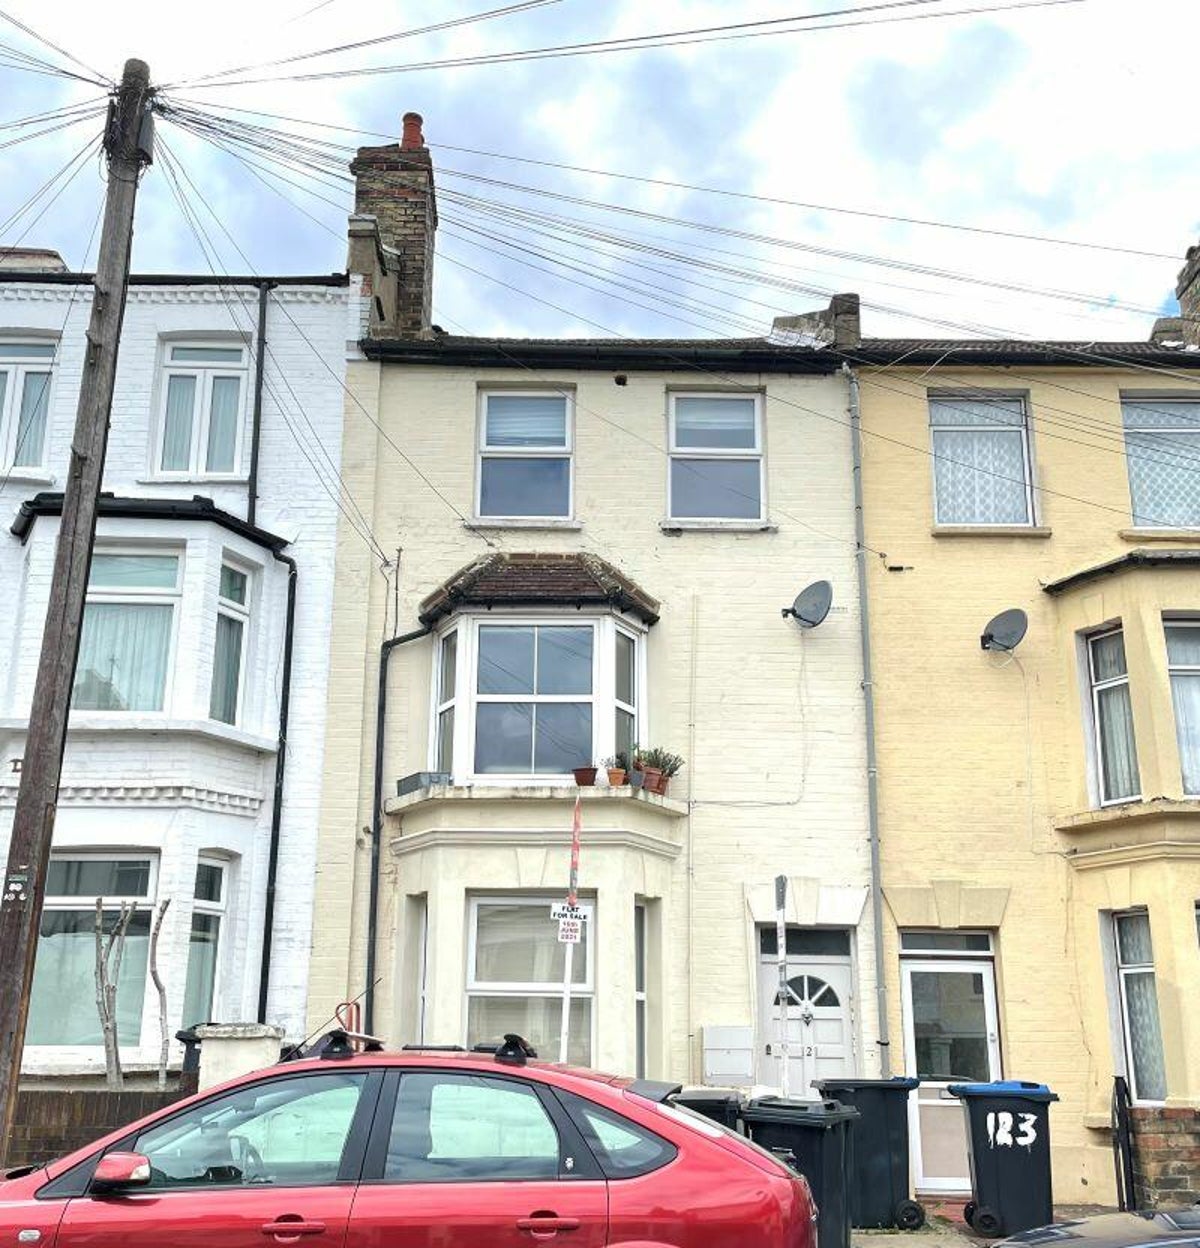 bargain basement: land beneath a house in south east london up for auction for £5,000